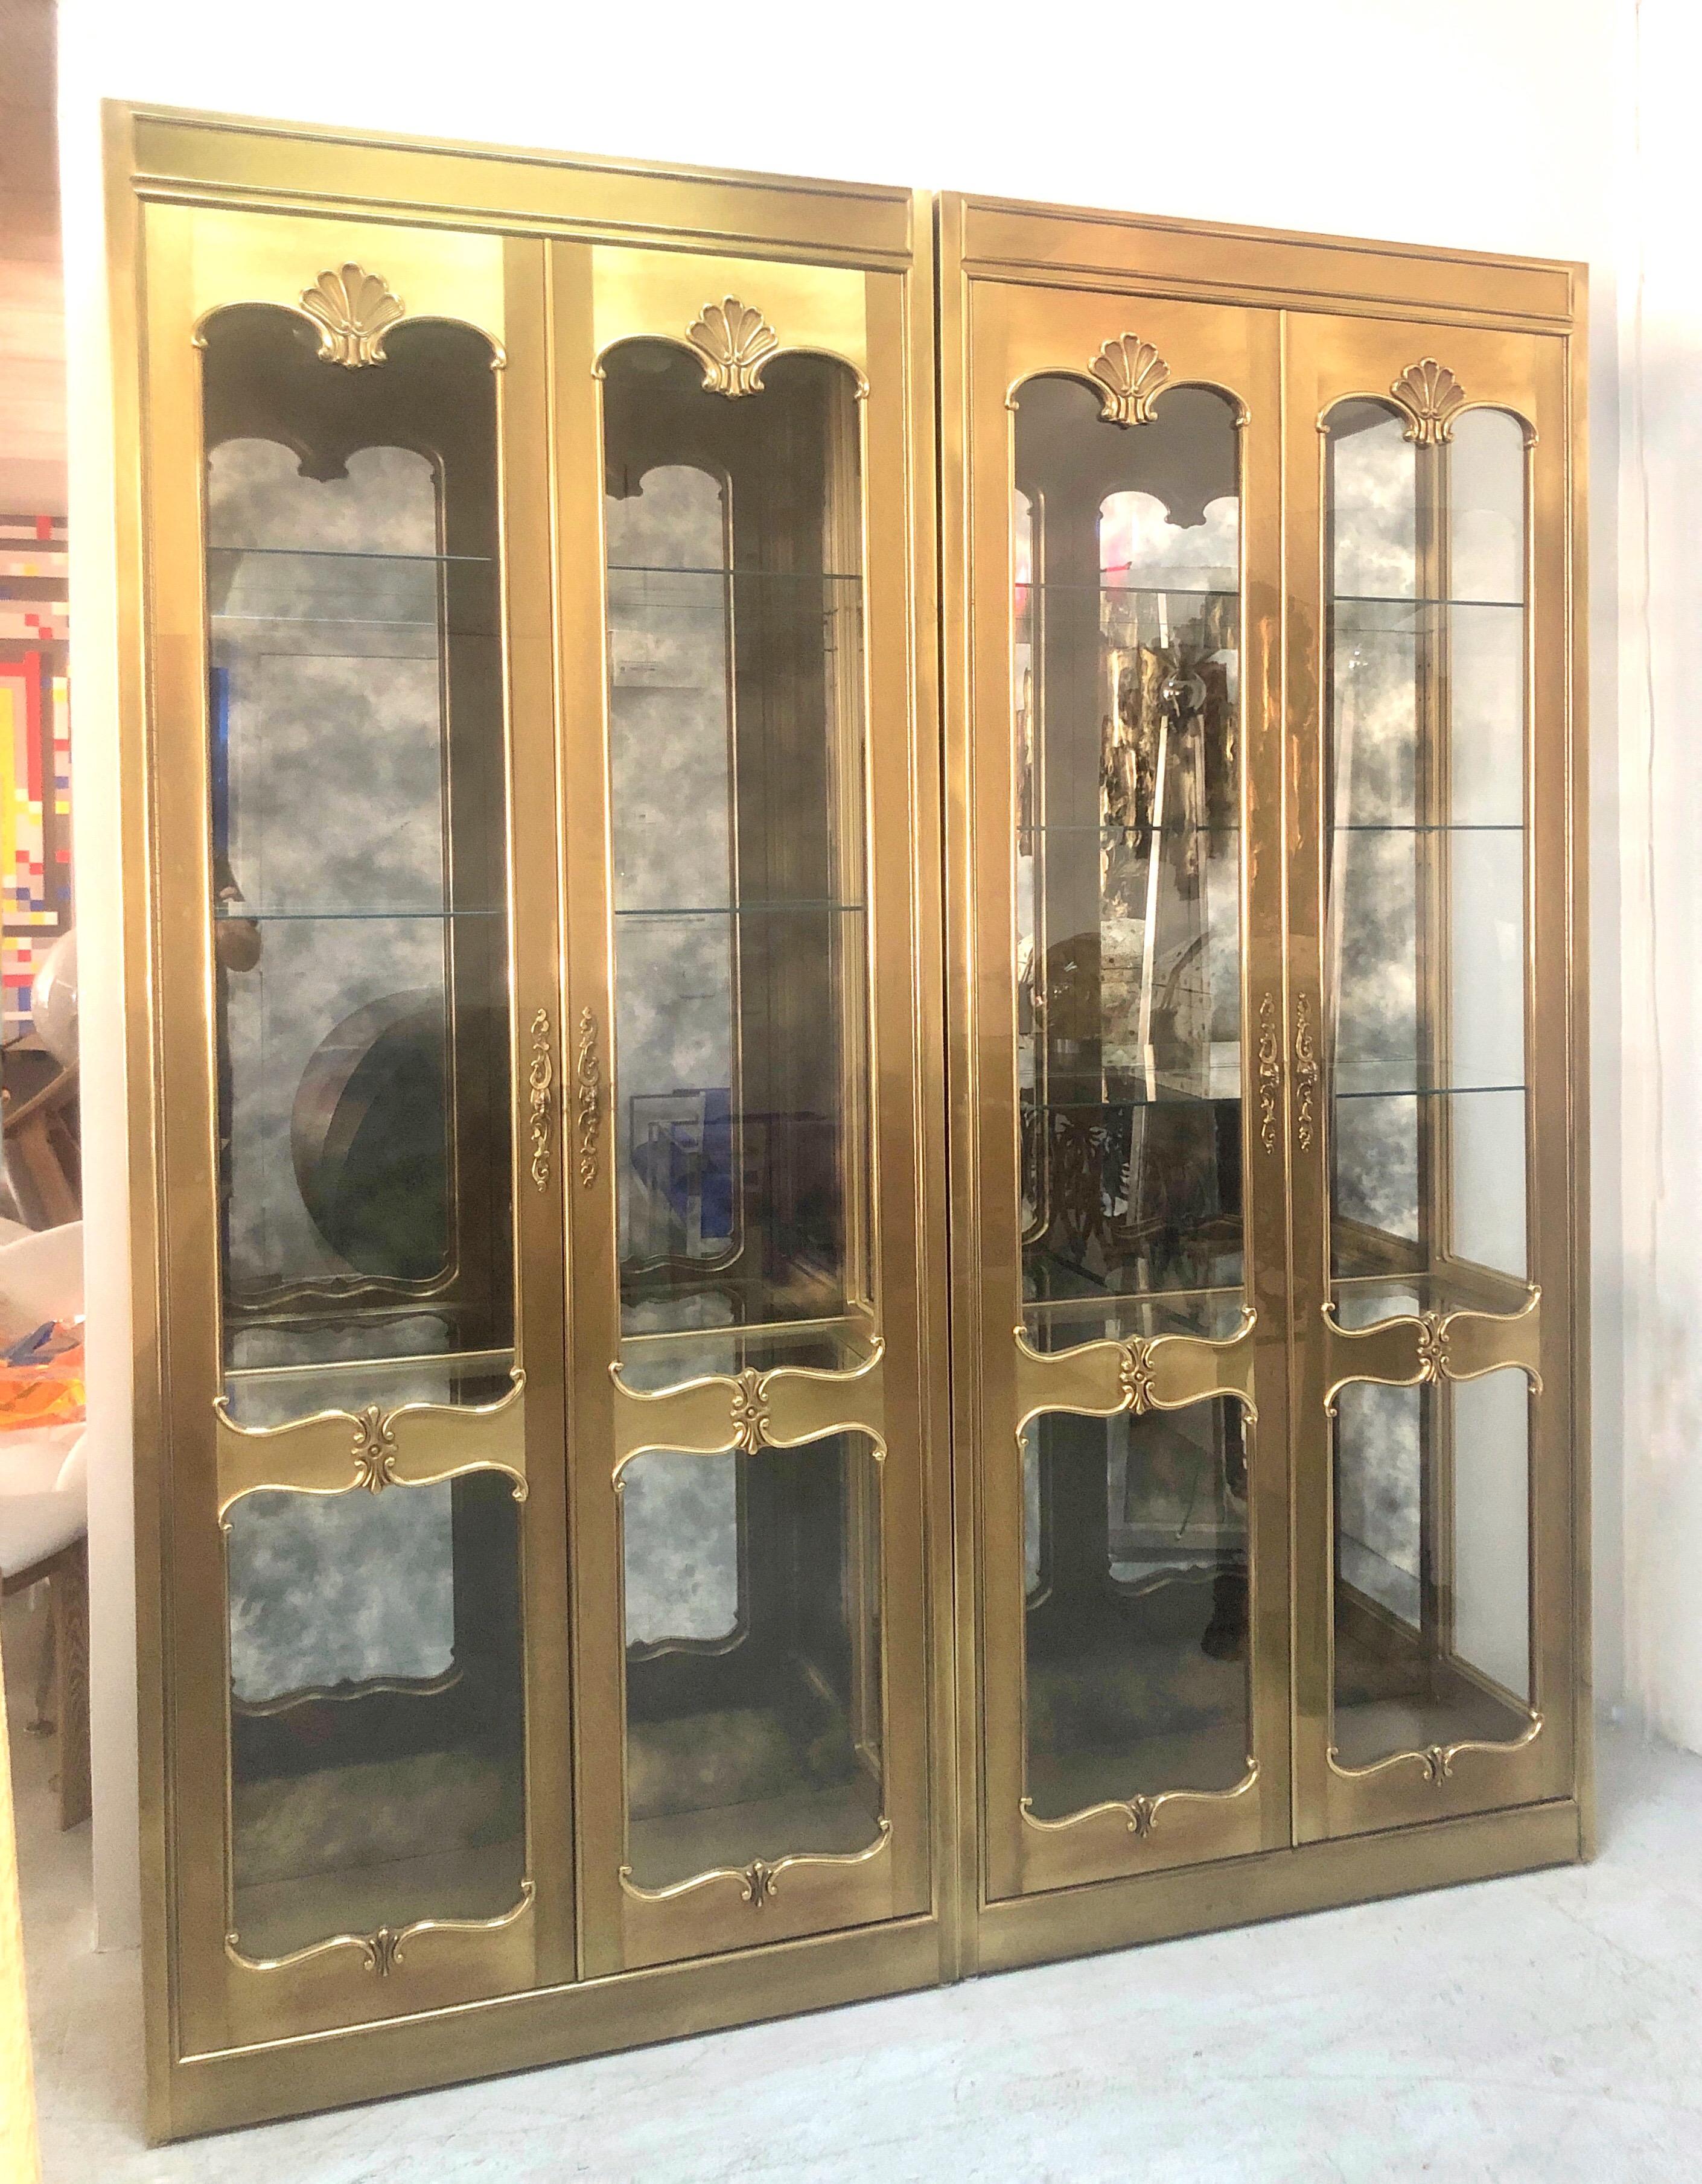 A pair of vitrines or display cabinets by Mastercraft. Modern design with a Classic flair. Perfect for a home or retail installation.